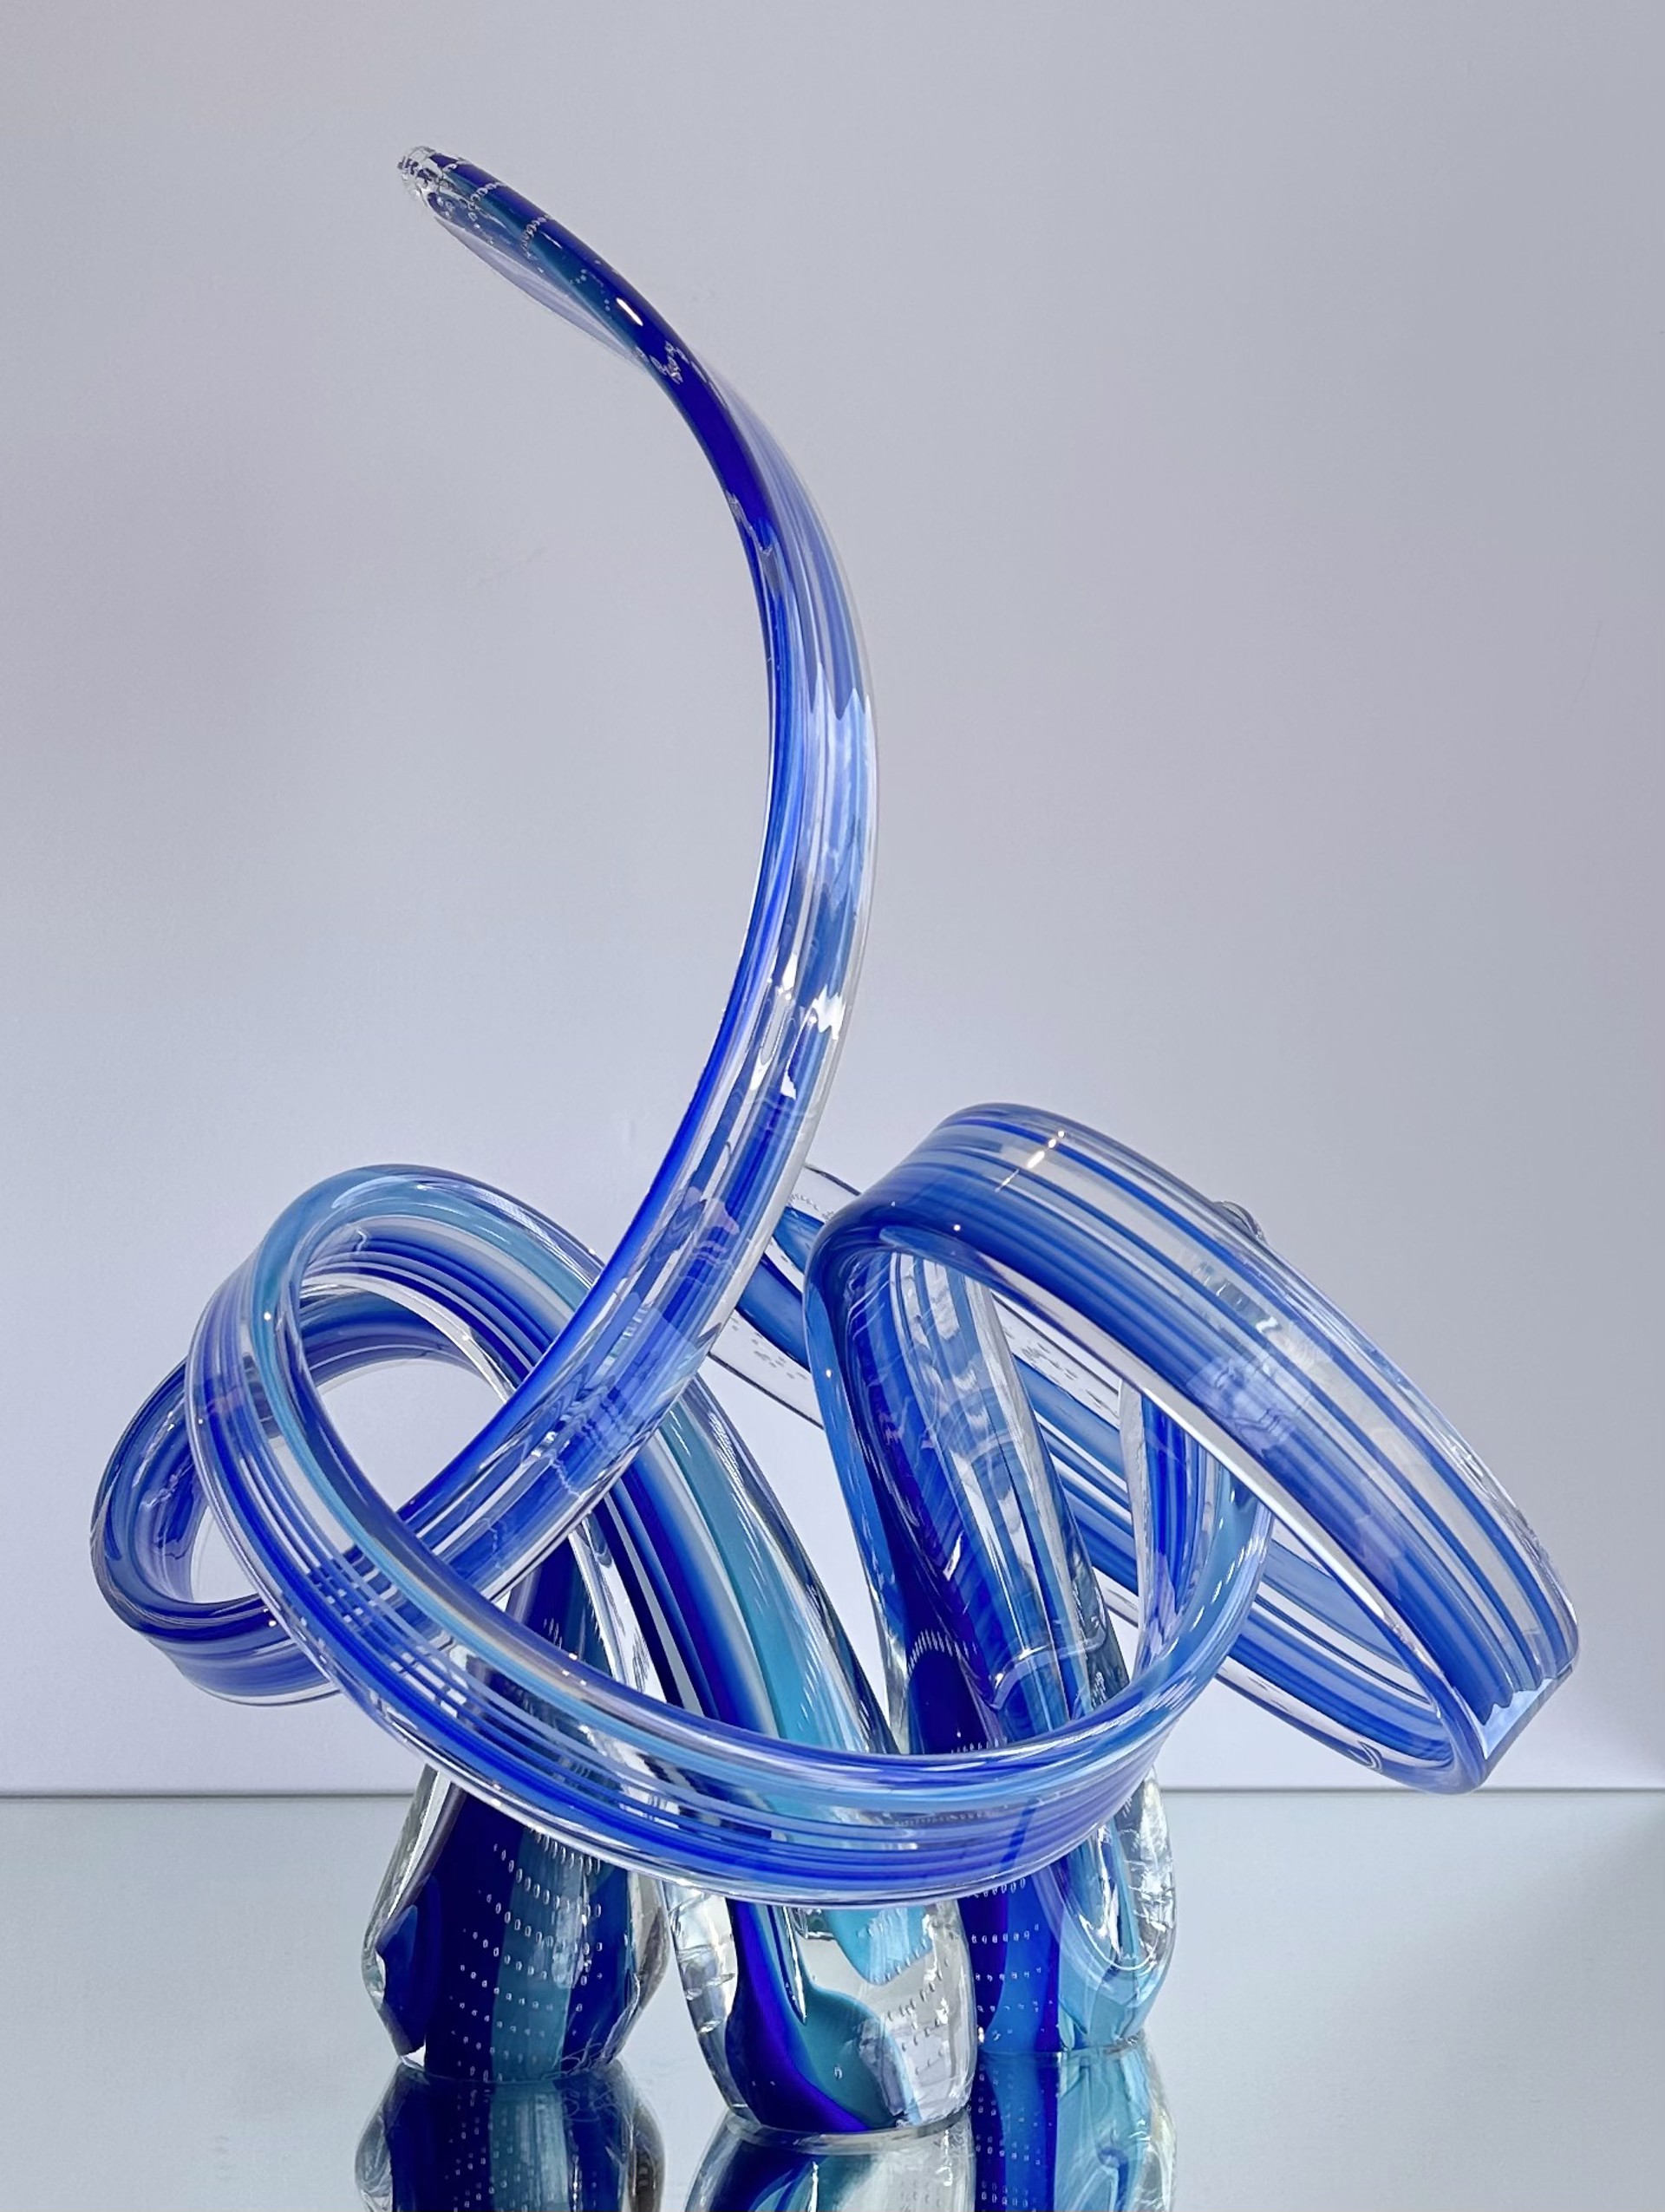 Ribbon Momentum - Blue/Turquoise Neon by Scott Hartley